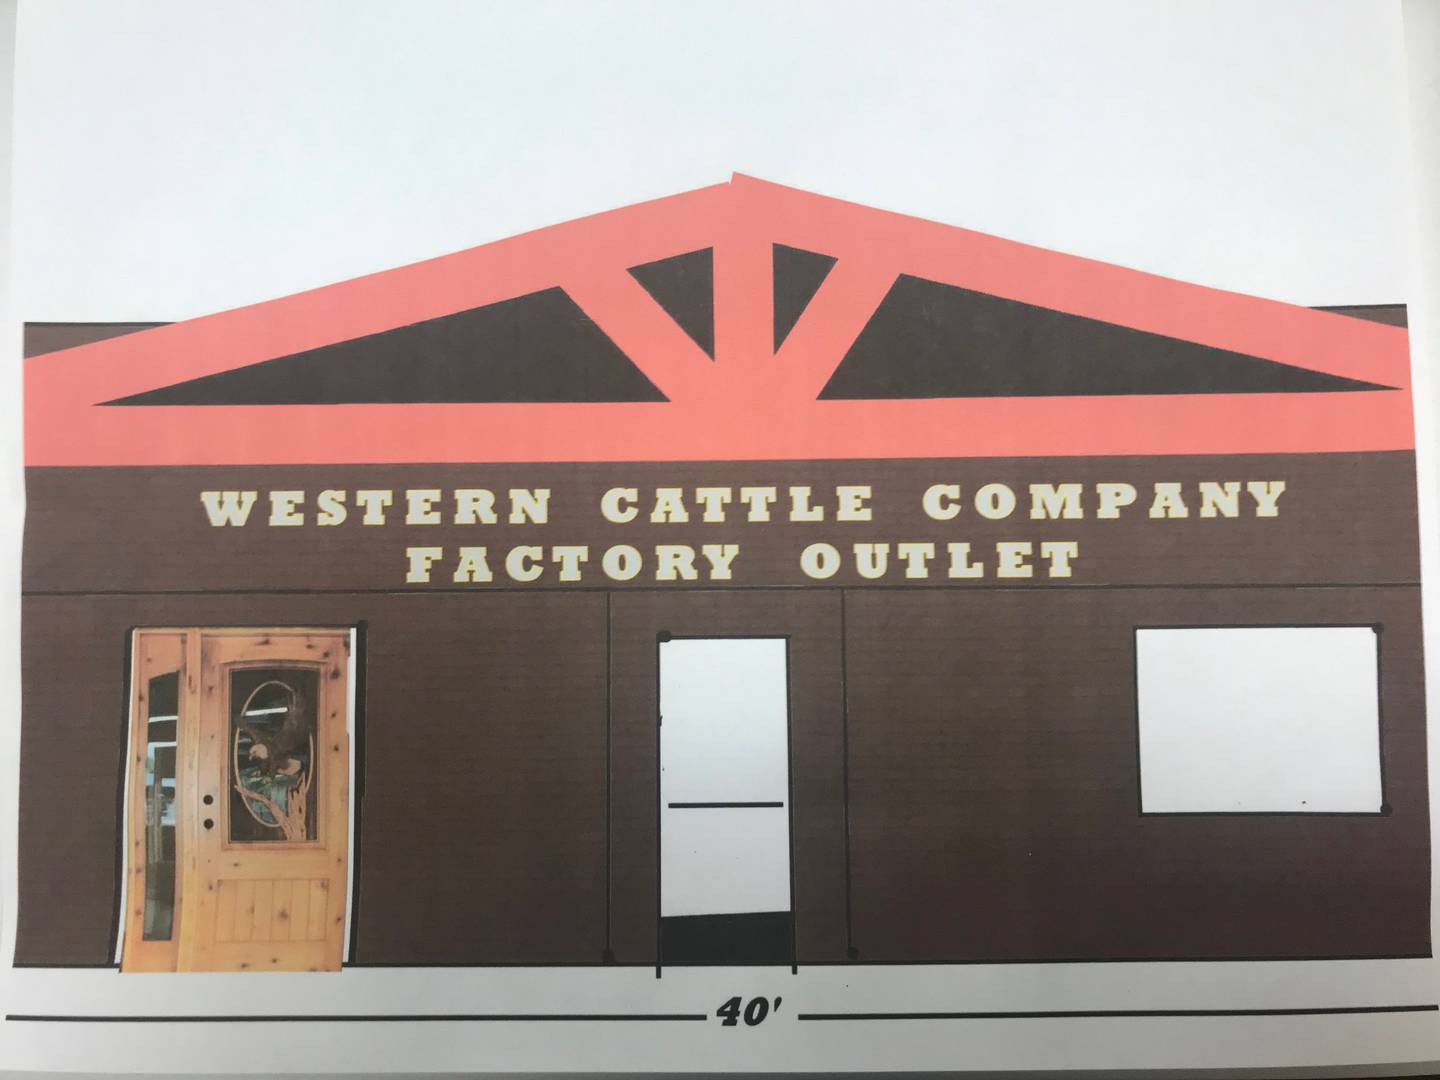 A rendering of facade improvements to 130 Mill St. in Utica (the former Mill Street Market), once it becomes Thursday, the Western Cattle Company Factory Outlet.